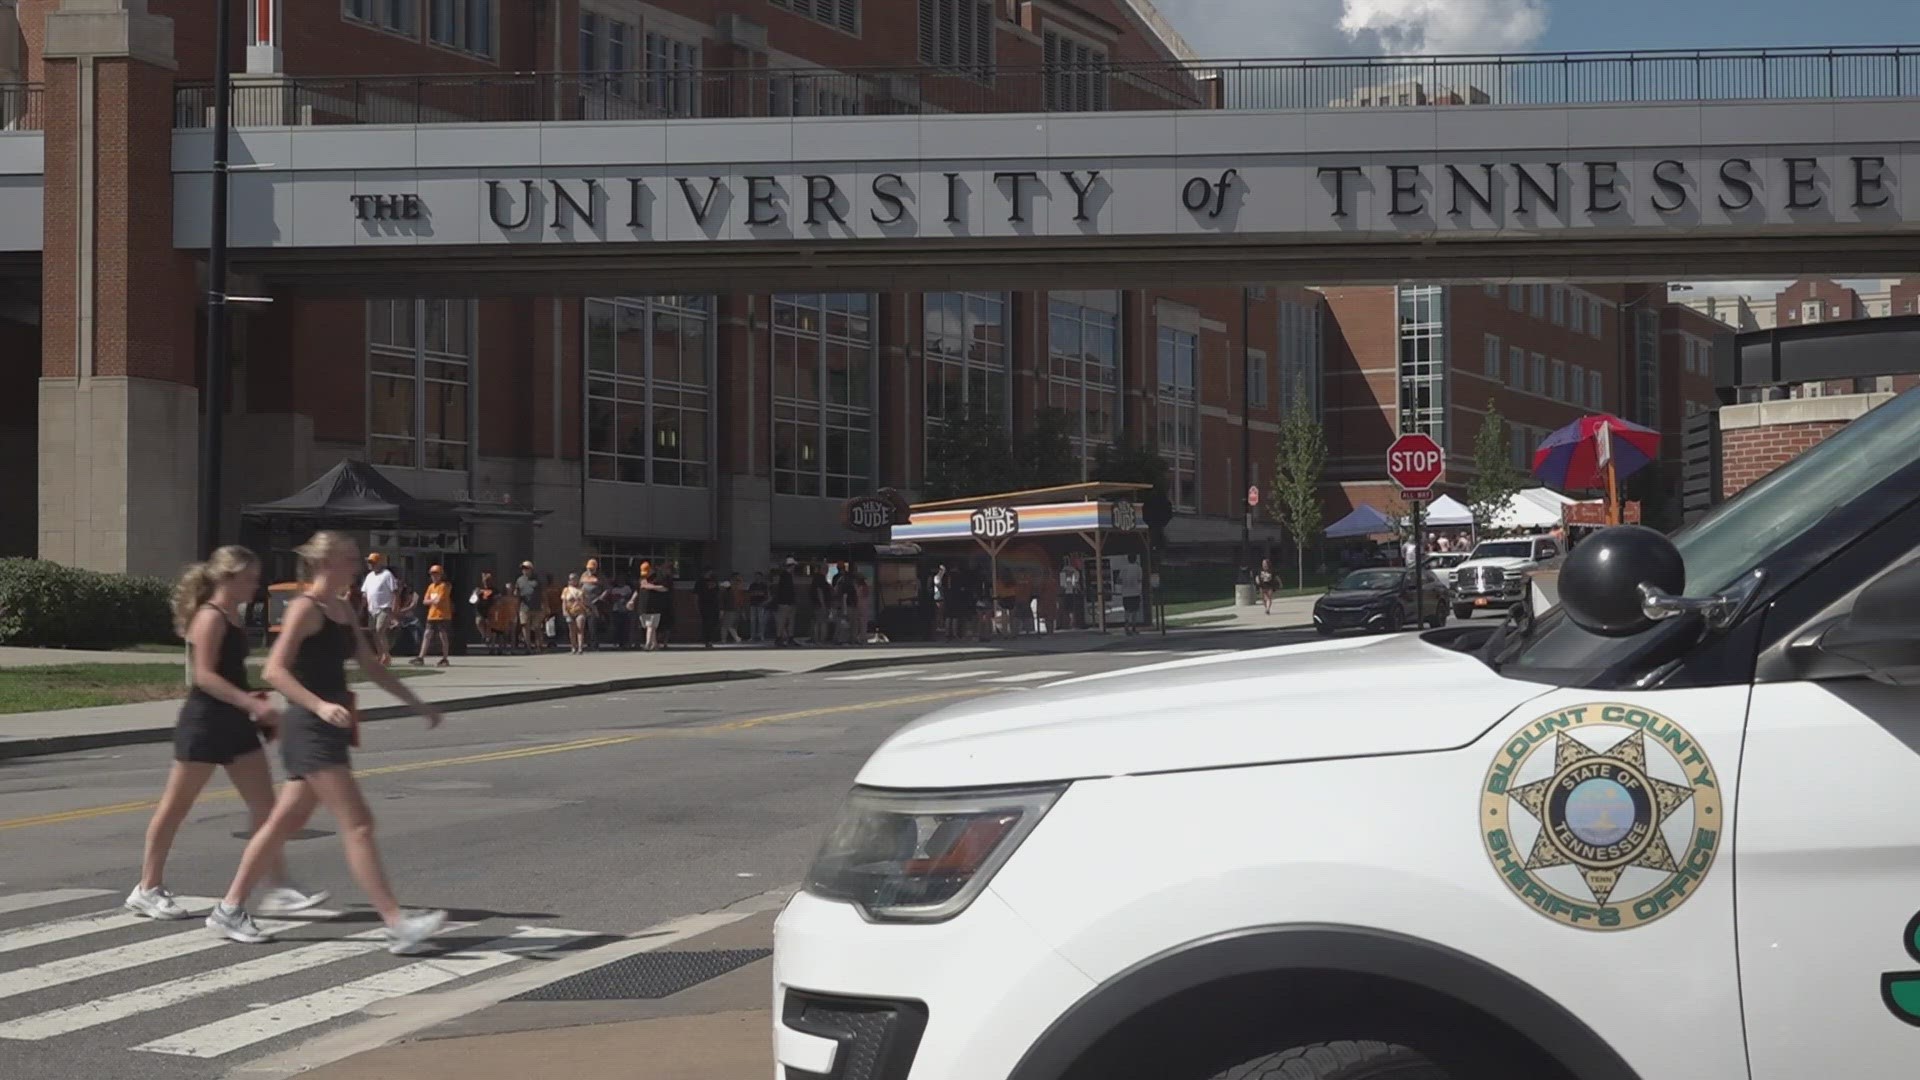 UTPD says that game days are a "full hands-on-deck" situation for the department.